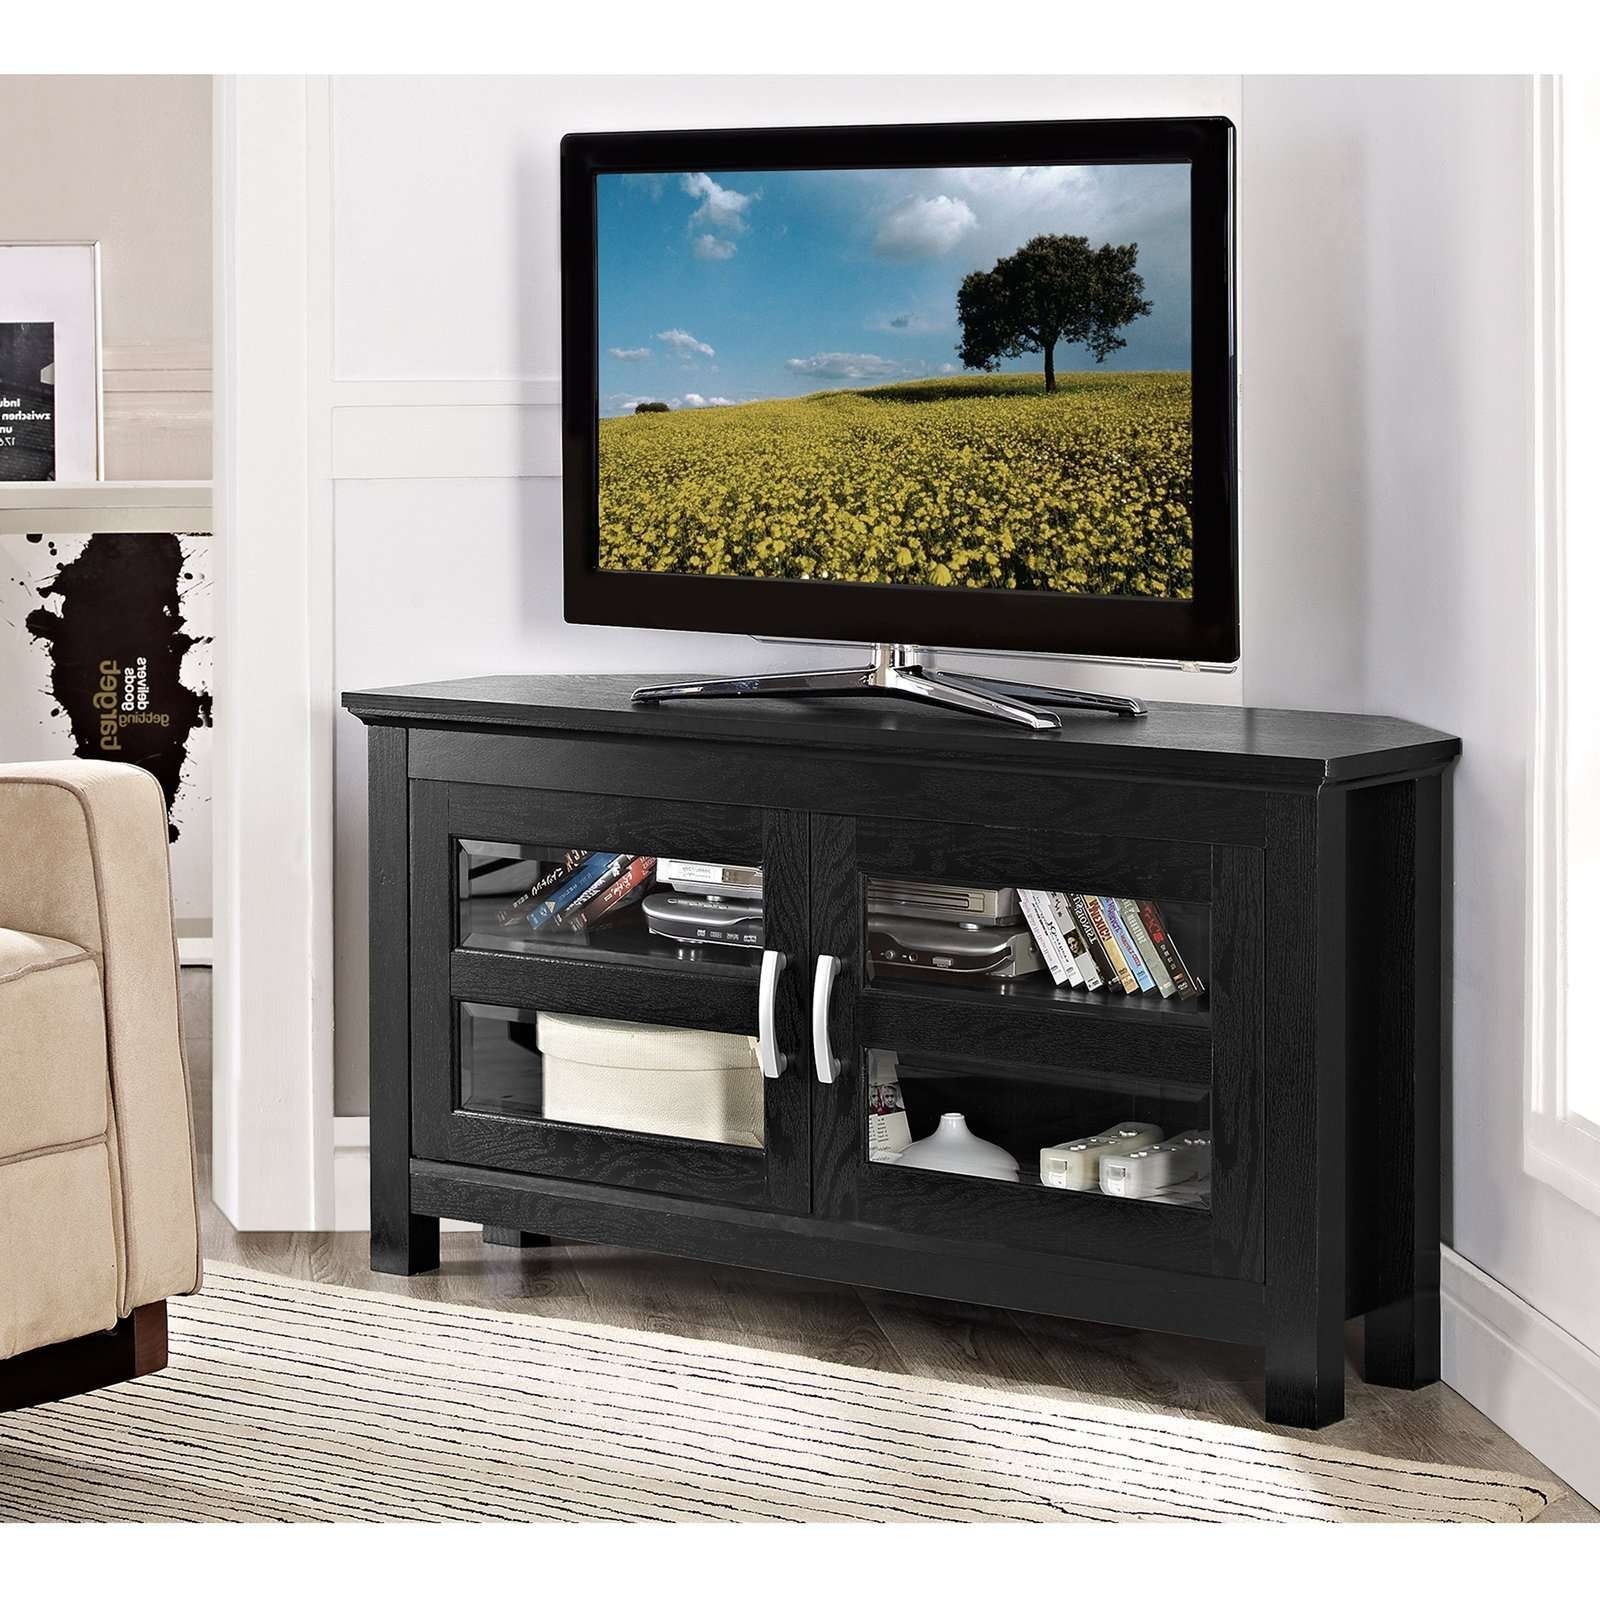 Furniture. Wonderful Design Of Wooden Tv Stands With Mount To For Silver Corner Tv Stands (Gallery 4 of 15)